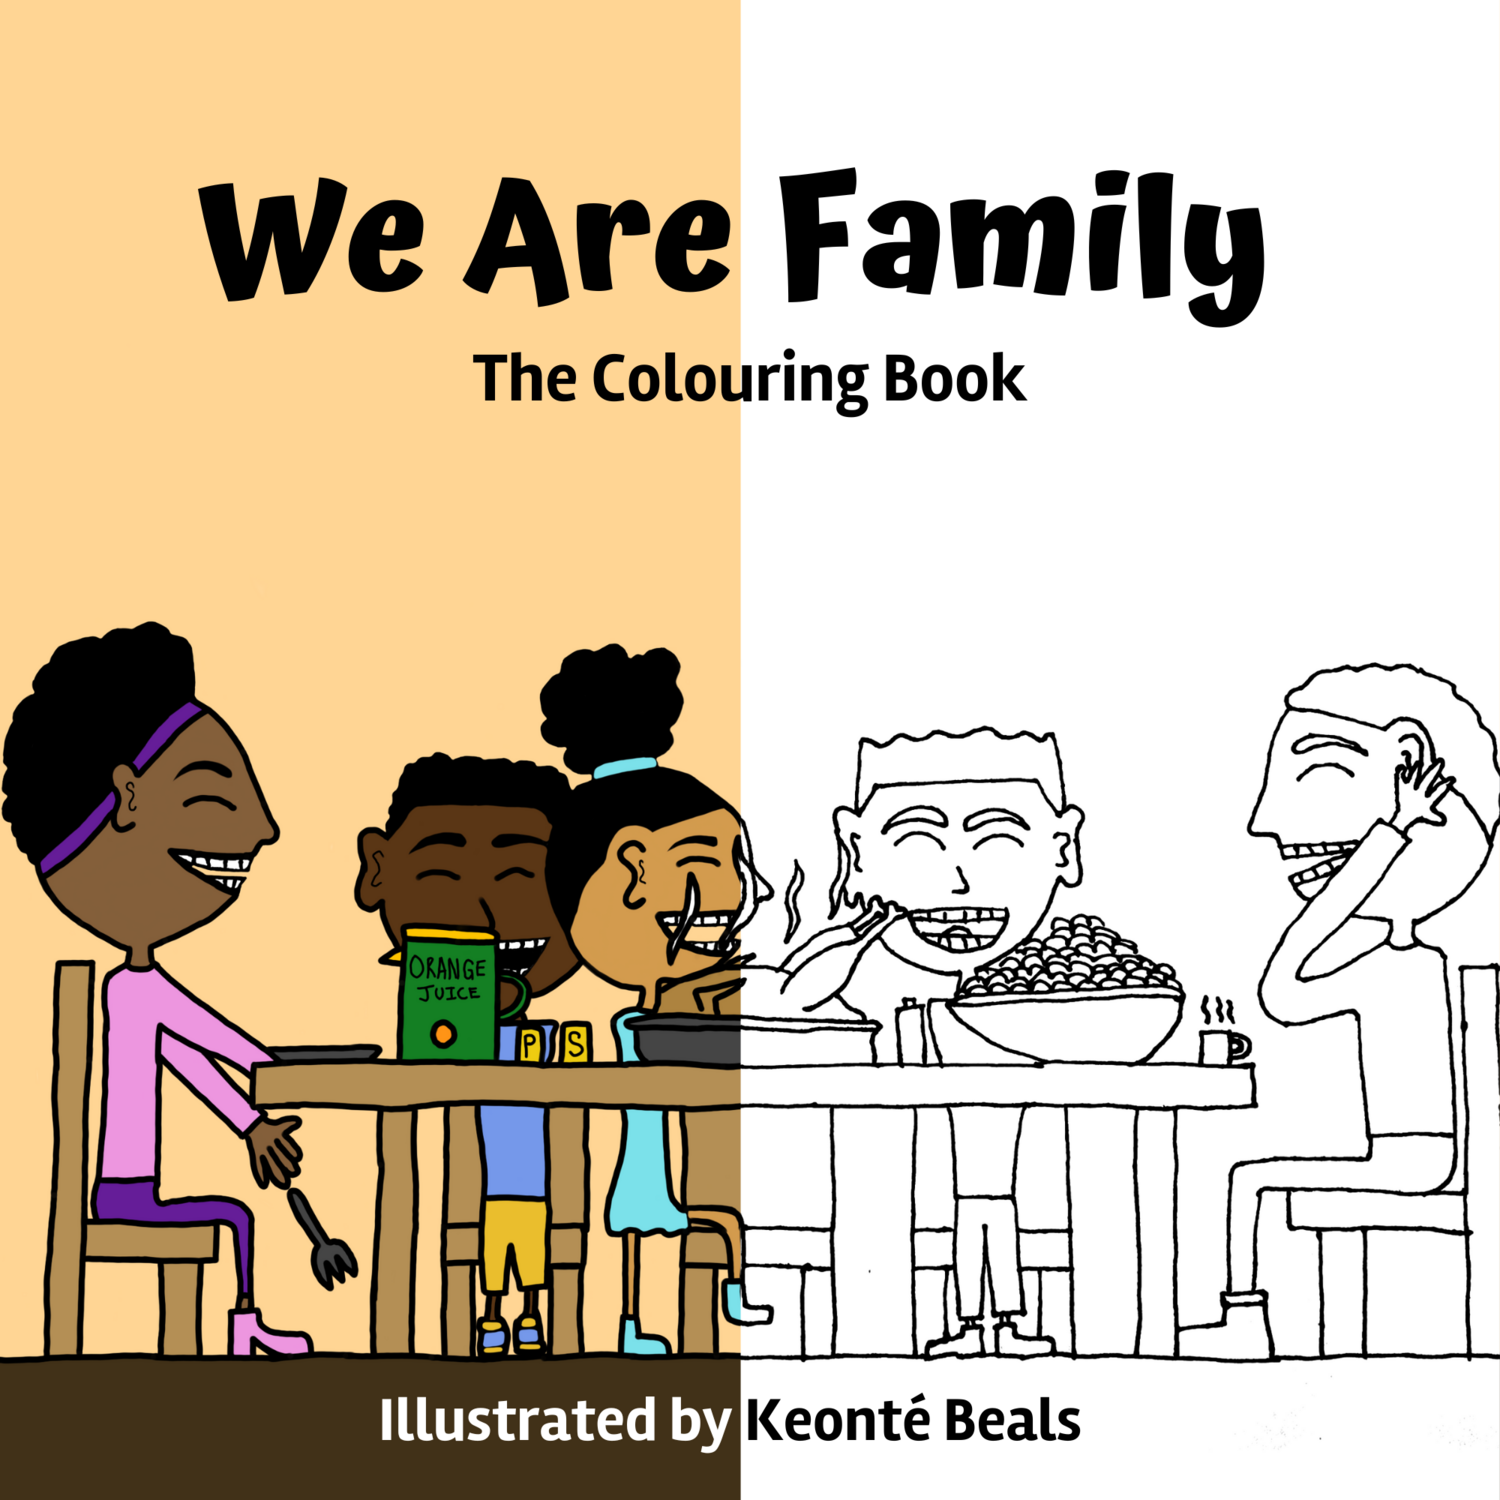 'We Are Family' Children's Colouring Book